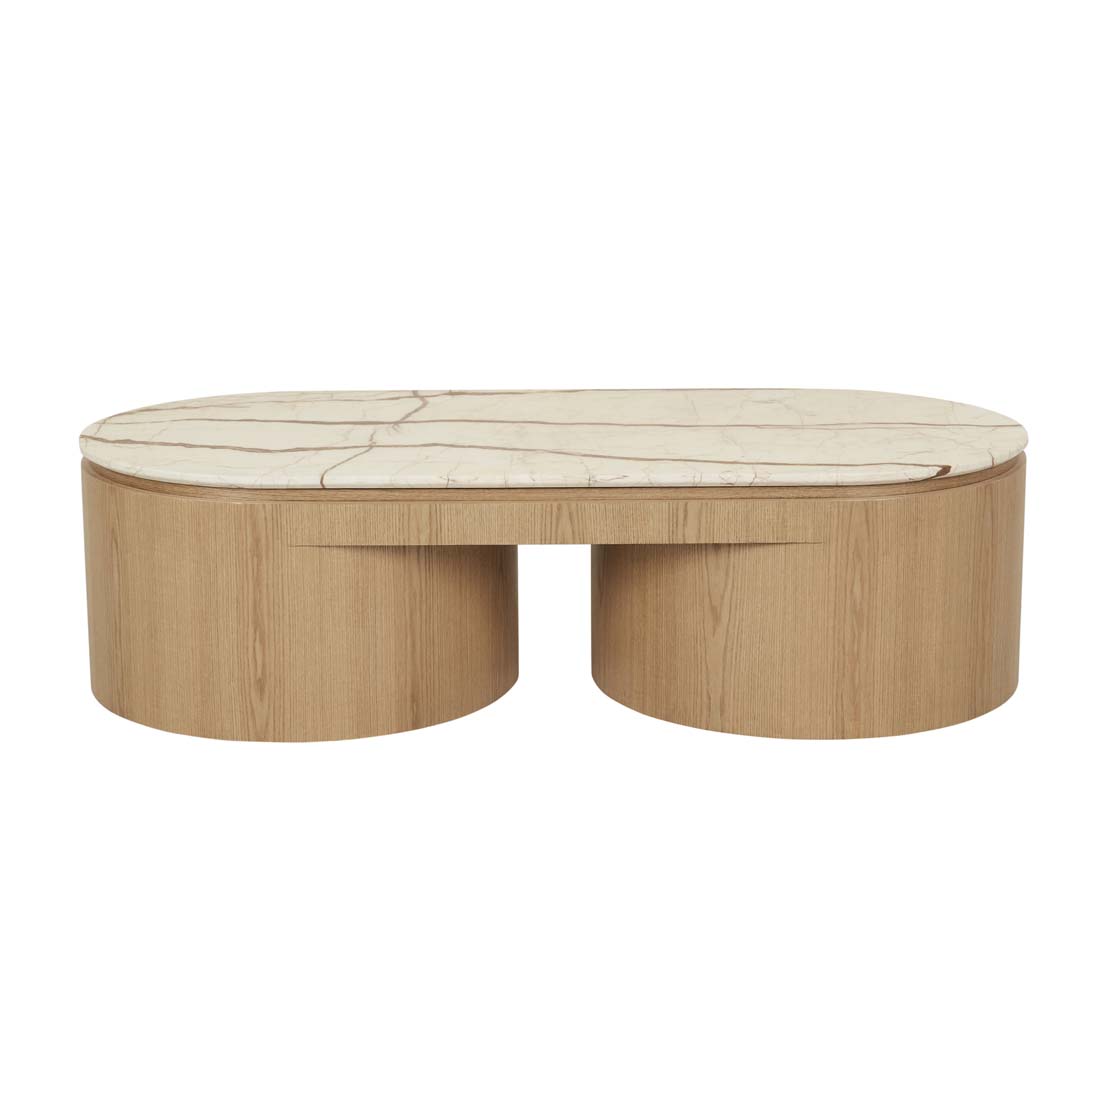 Pluto Oval Marble Coffee Table